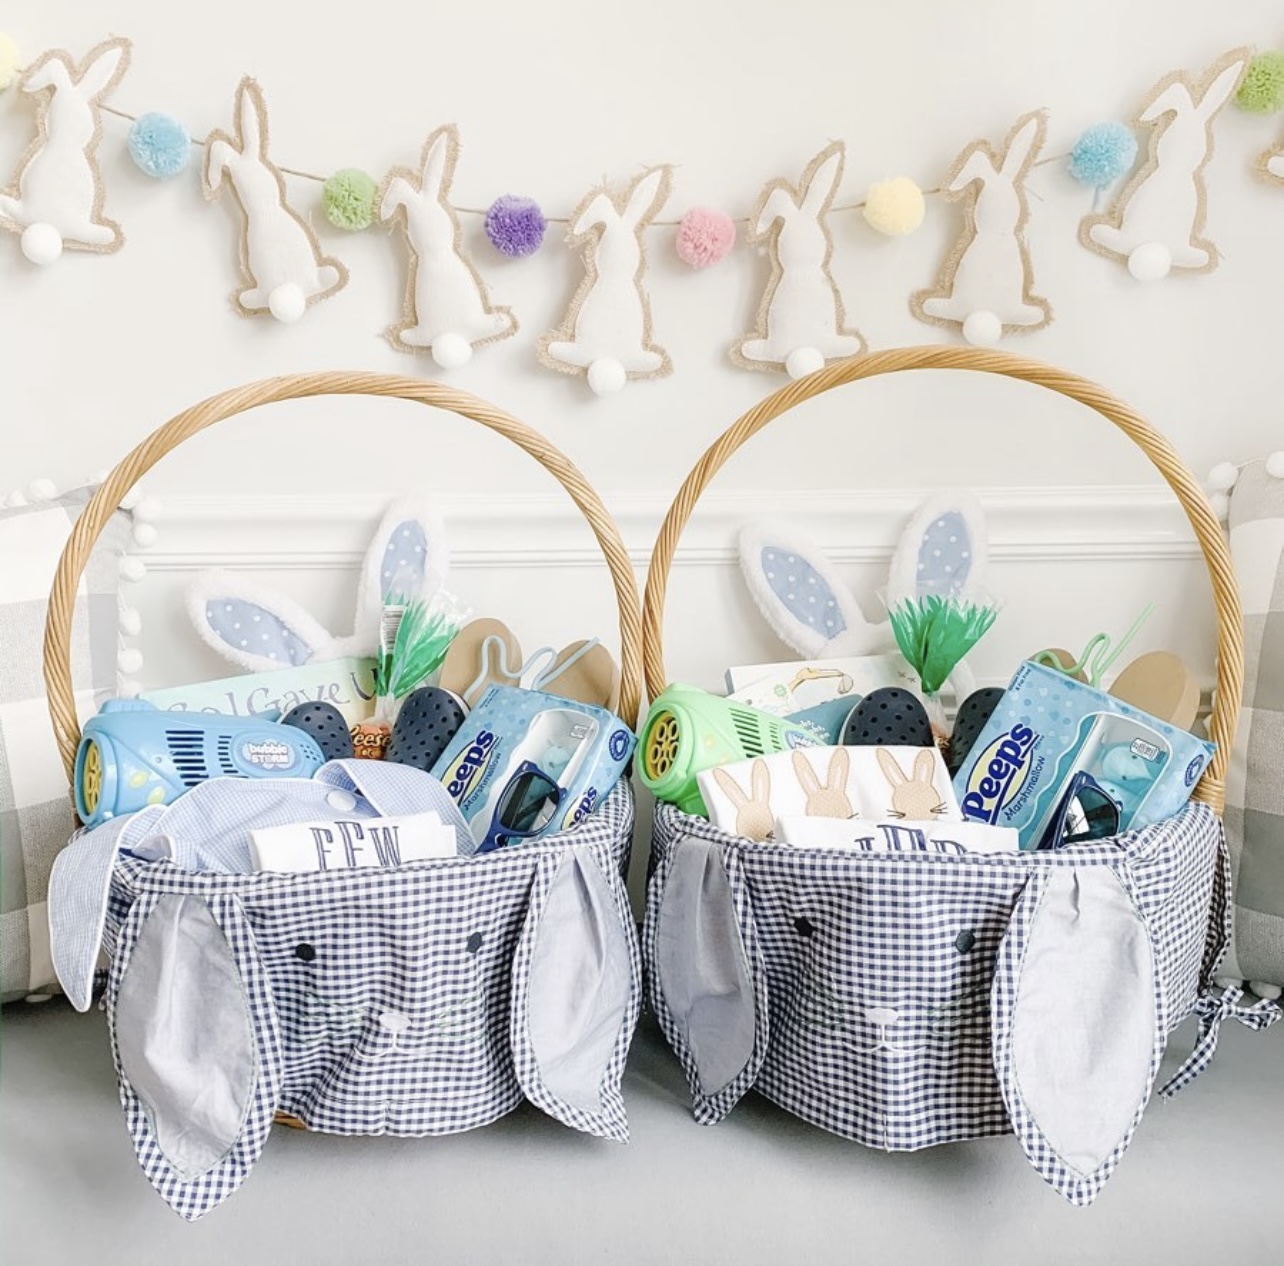 two easter baskets with blue gingham bunny liners filled with fillers sitting in front of a bunny banner